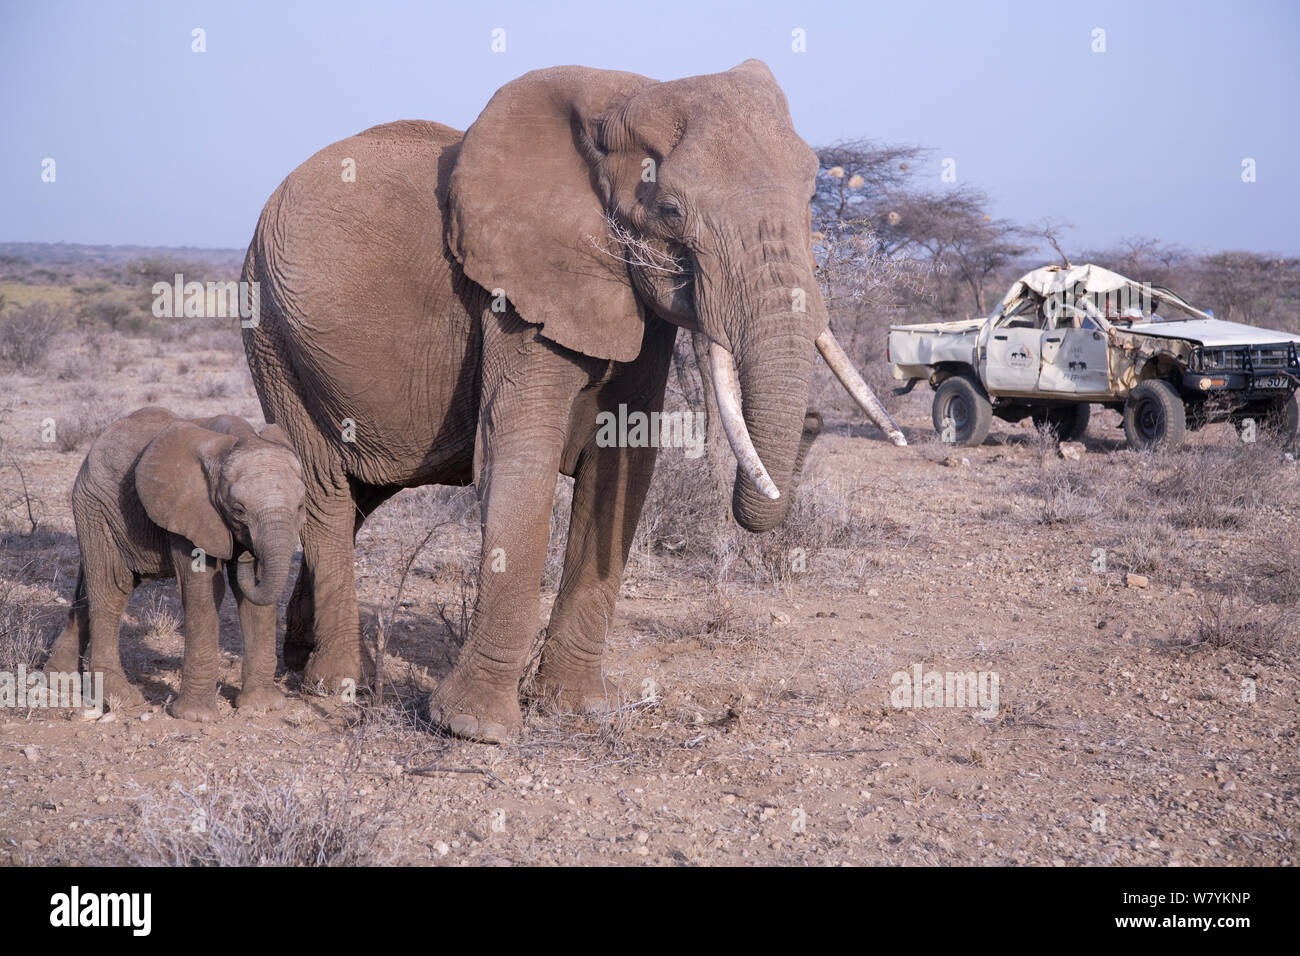 Daniel Lentipo, observing mother and calf African elephant (Loxodonta africana) driving the former research vehicle destroyed by bull elephant in Samburu National Reserve, Kenya. August 2009. Model Released. Stock Photo